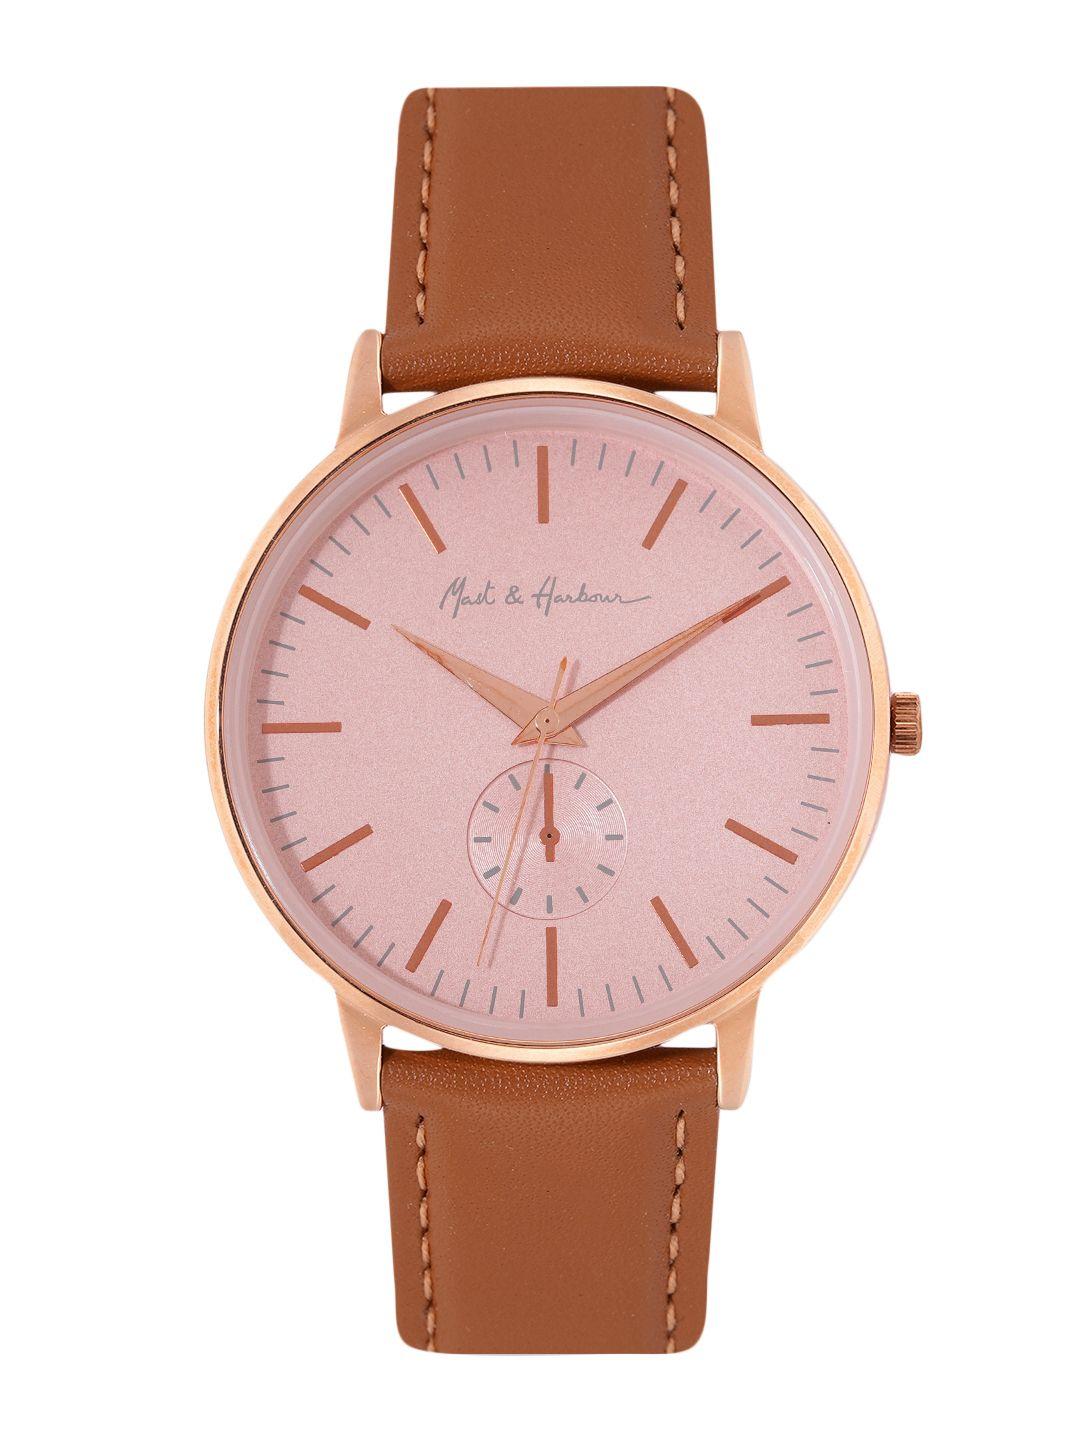 mast-&-harbour-women-analogue-watch-mh-01-02a-rose-gold